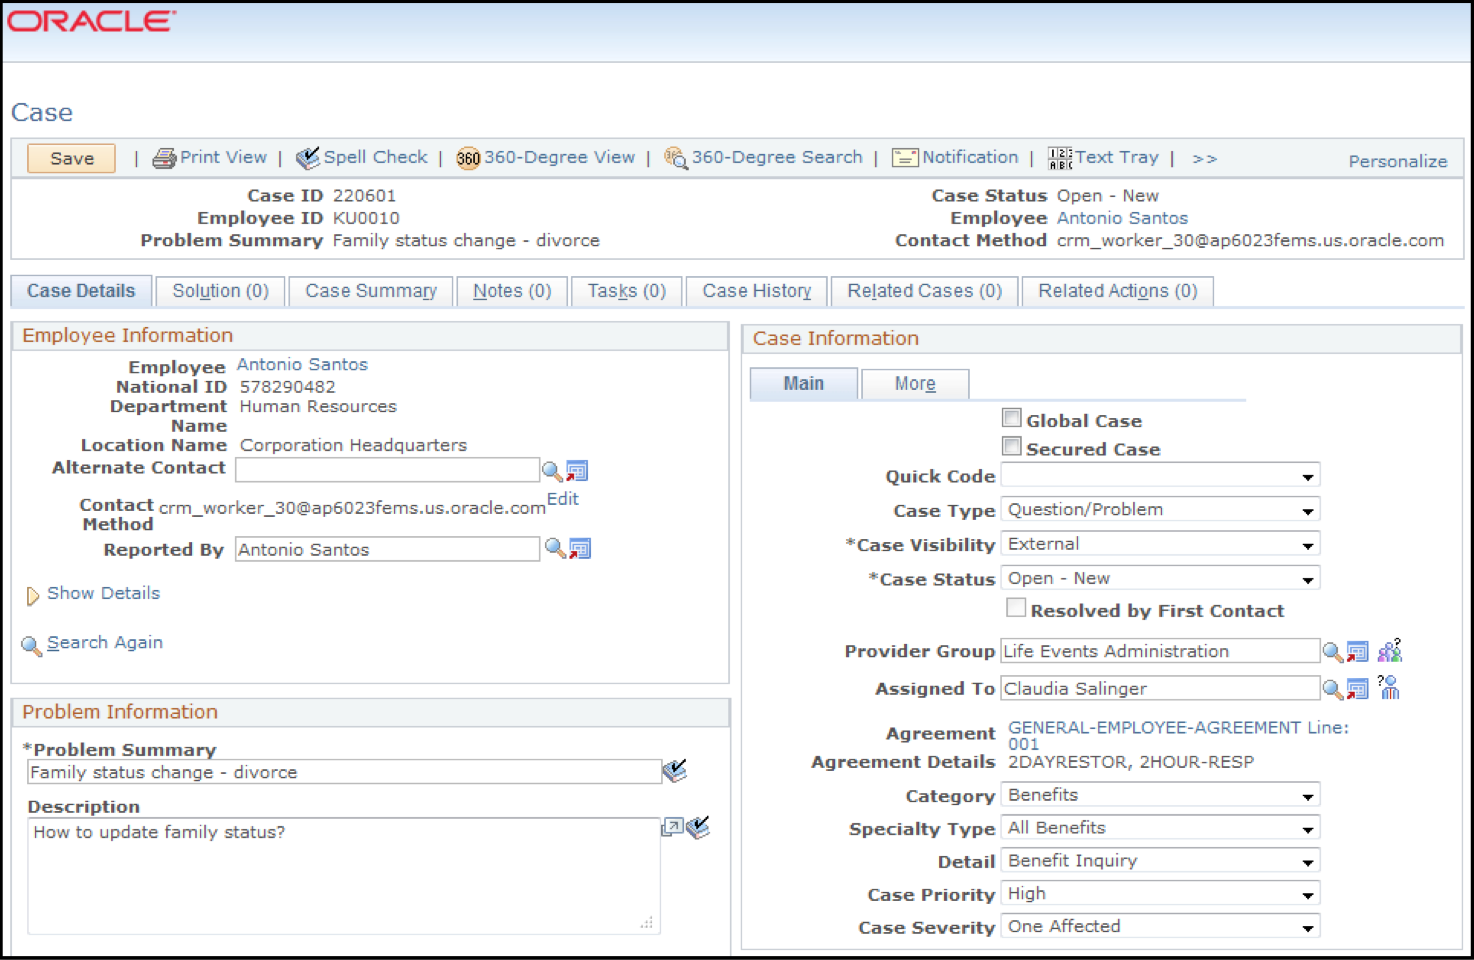 All case management activities are accessible on one page in PeopleSoft HR HelpDesk. (Screenshot courtesy of Oracle)